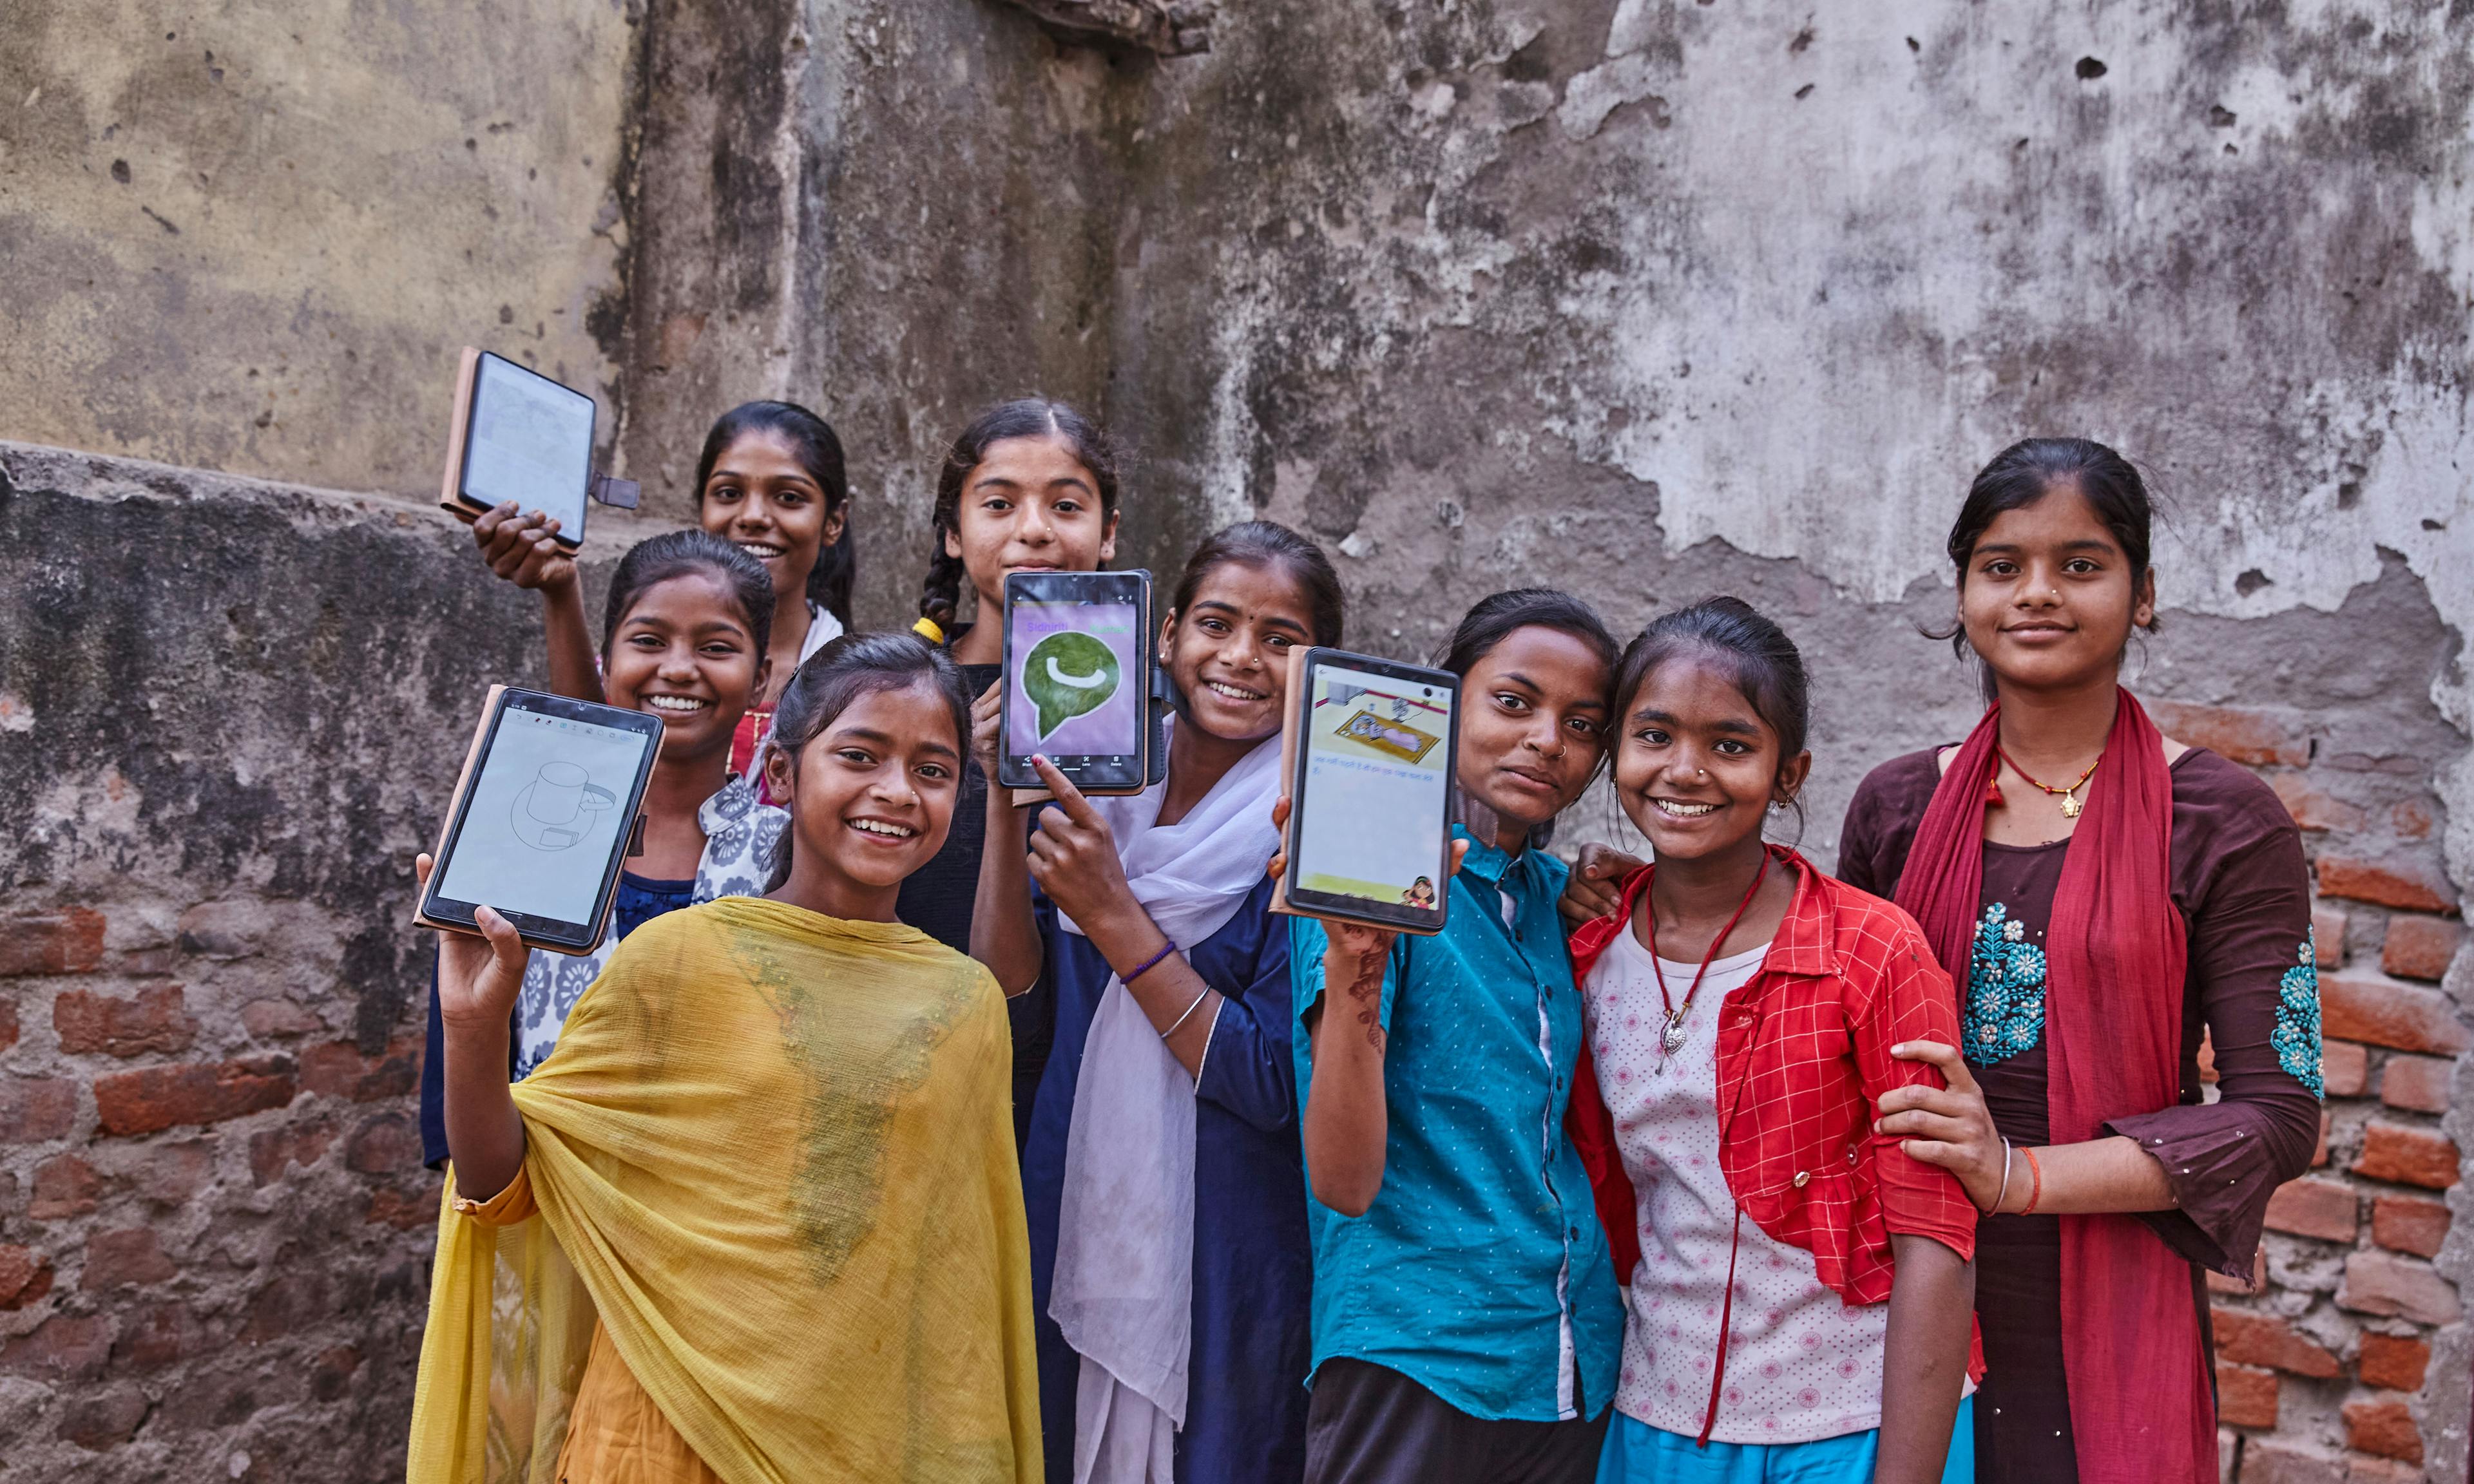 A group of girls in India holding tablets donated by UNICEF